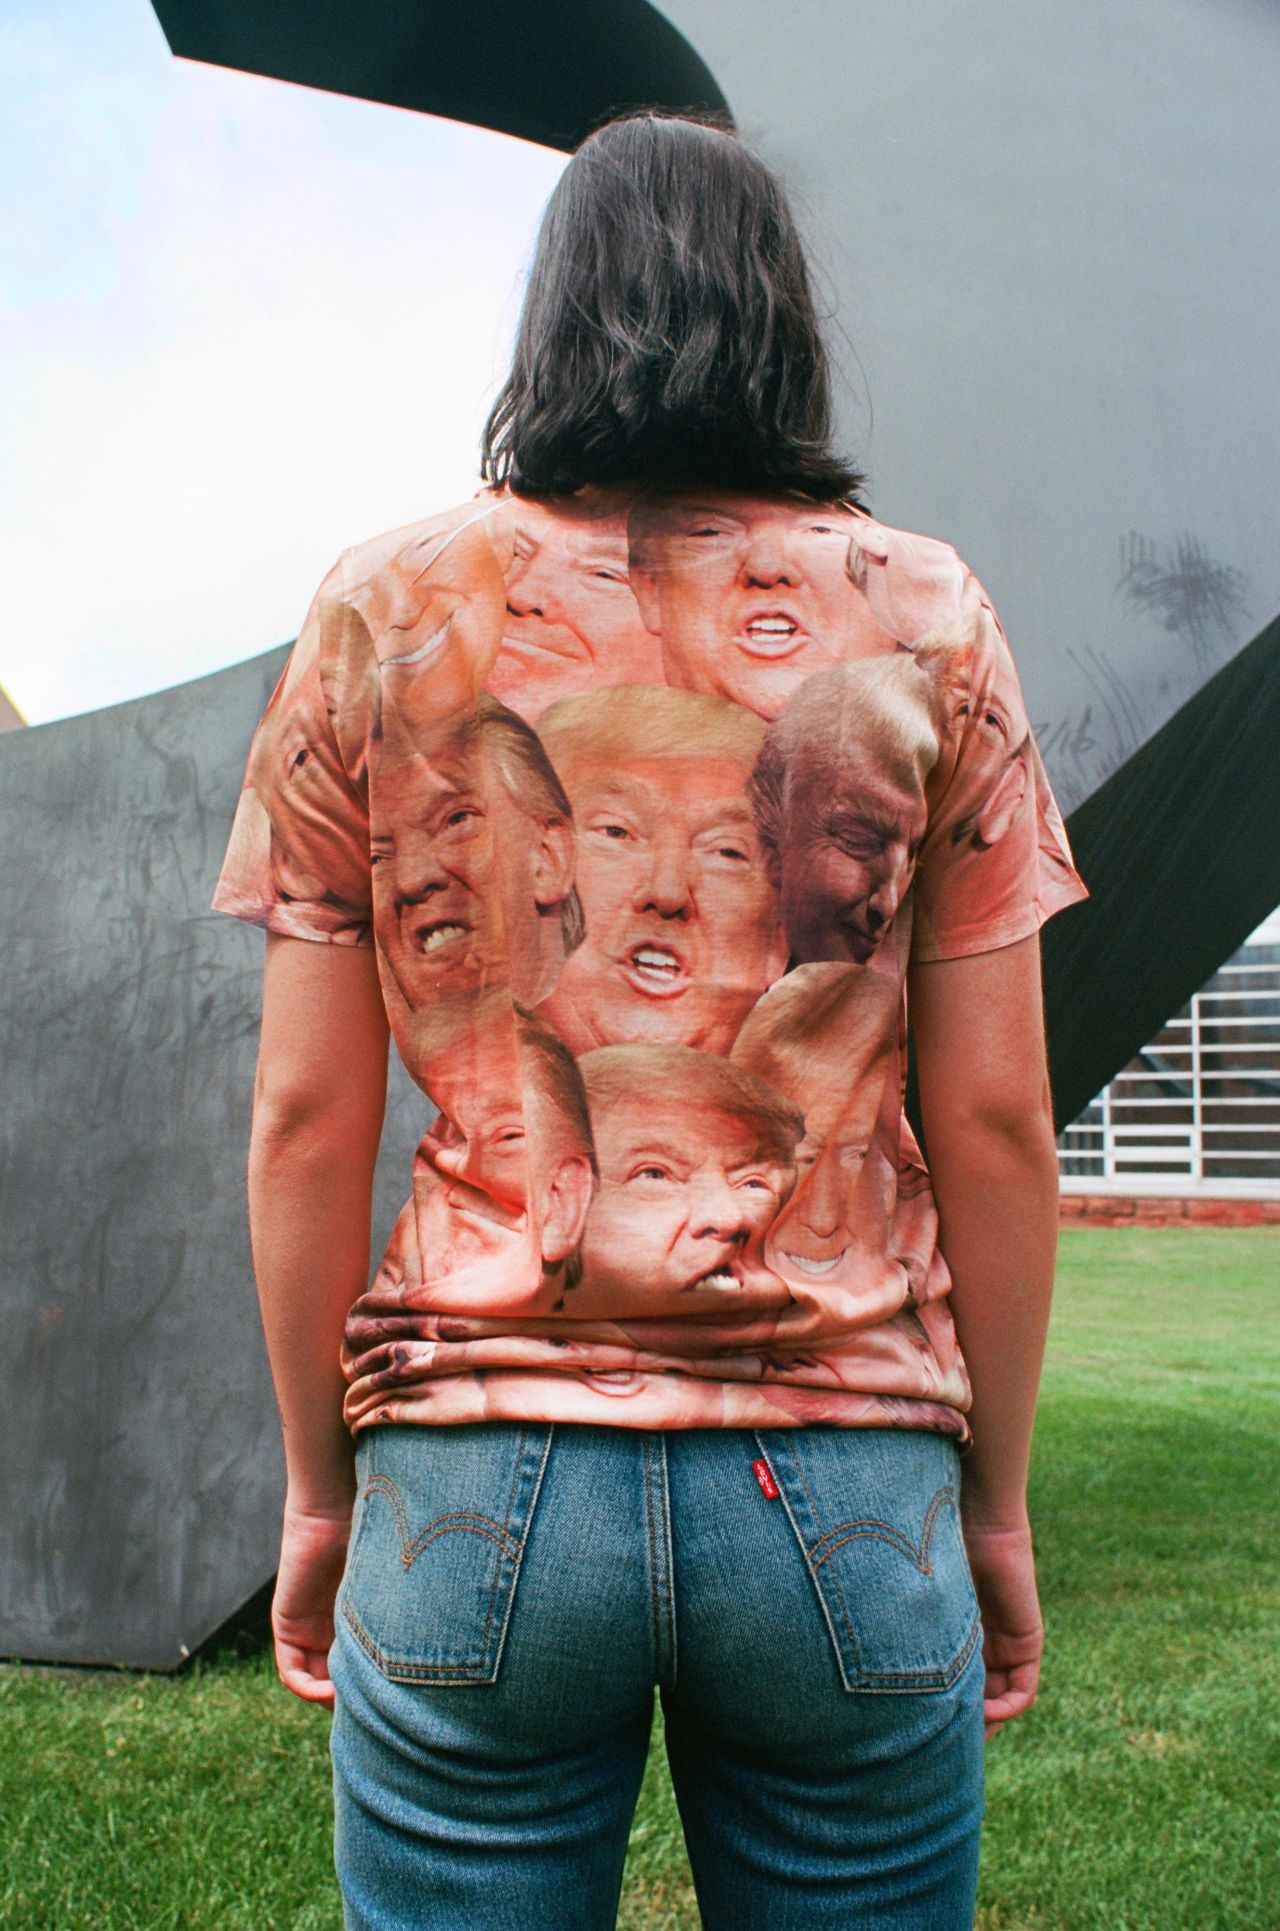 "All Over Trump" from the series "Not In Your Face" by Susan A. Barnett.